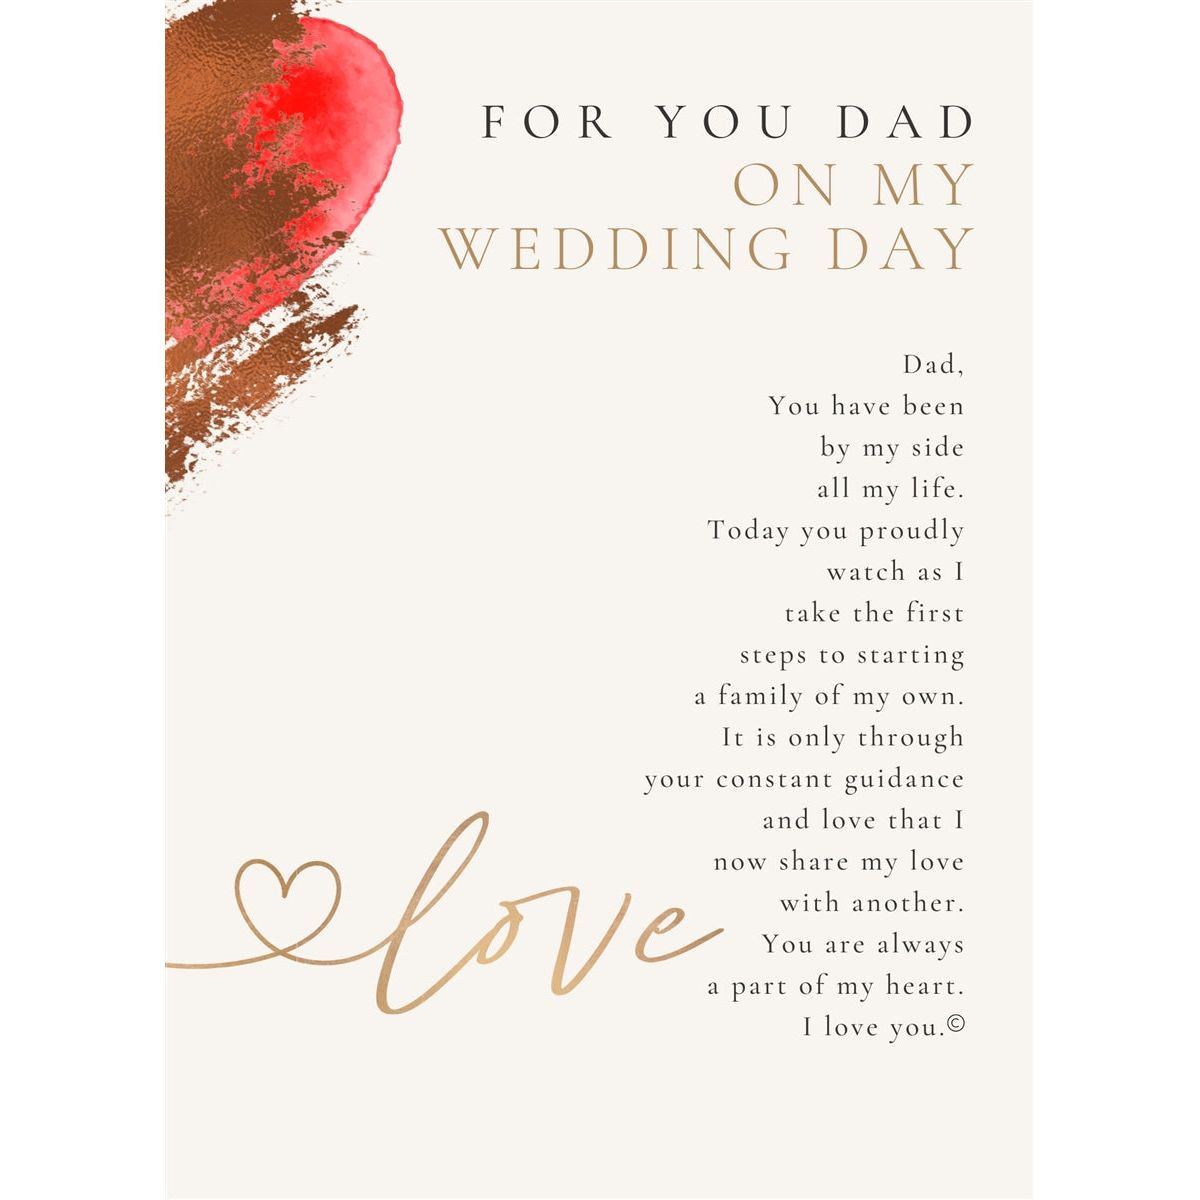 &quot;For You Dad On My Wedding Day&quot; artwork and poem.